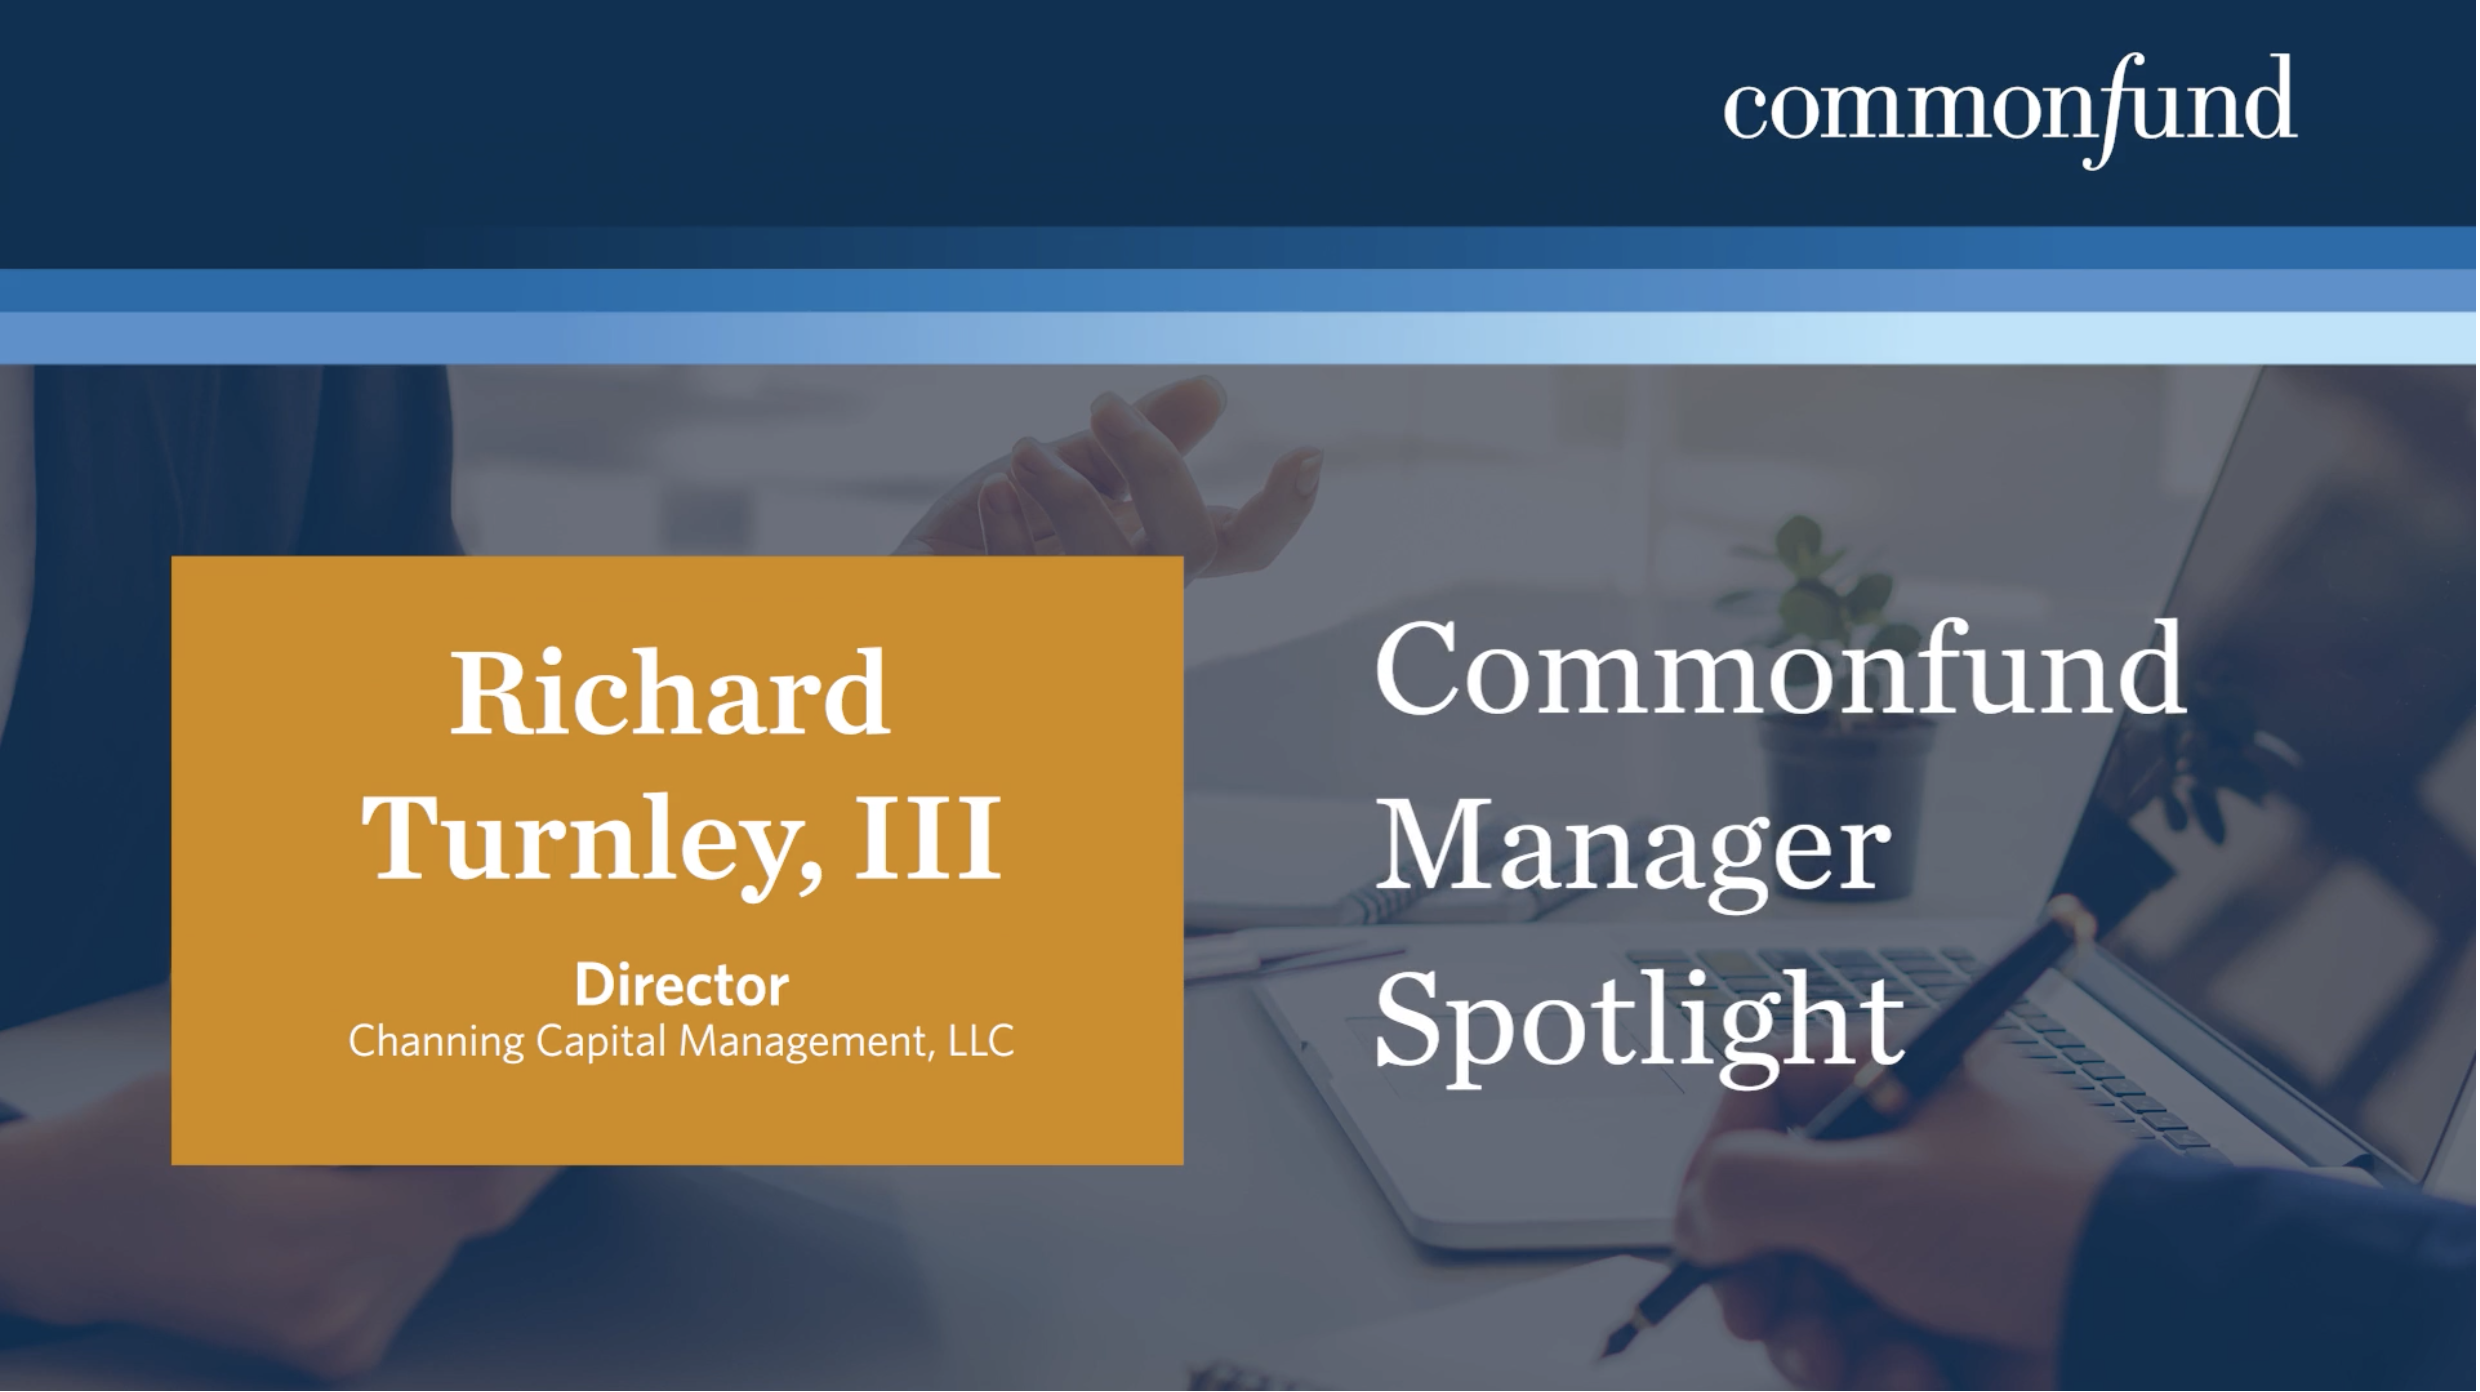 Commonfund Manager Spotlight | Channing Capital Management